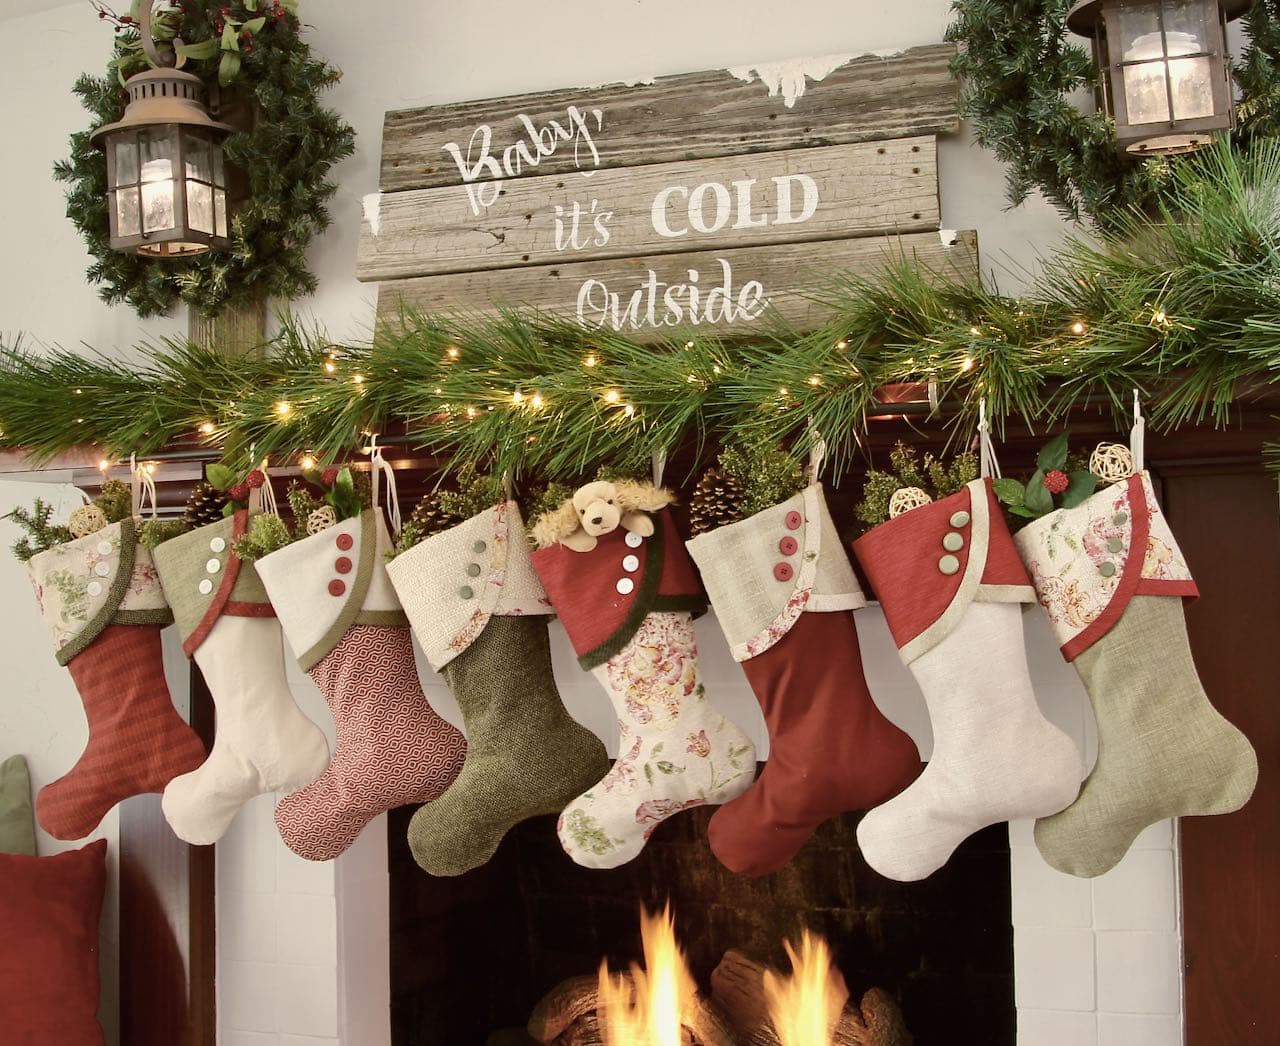 8 Cottage Christmas Stockings on a mantel with a vintage sign that reads "Baby, It's cold outside" flanked by vintage lanterns on rustic posts